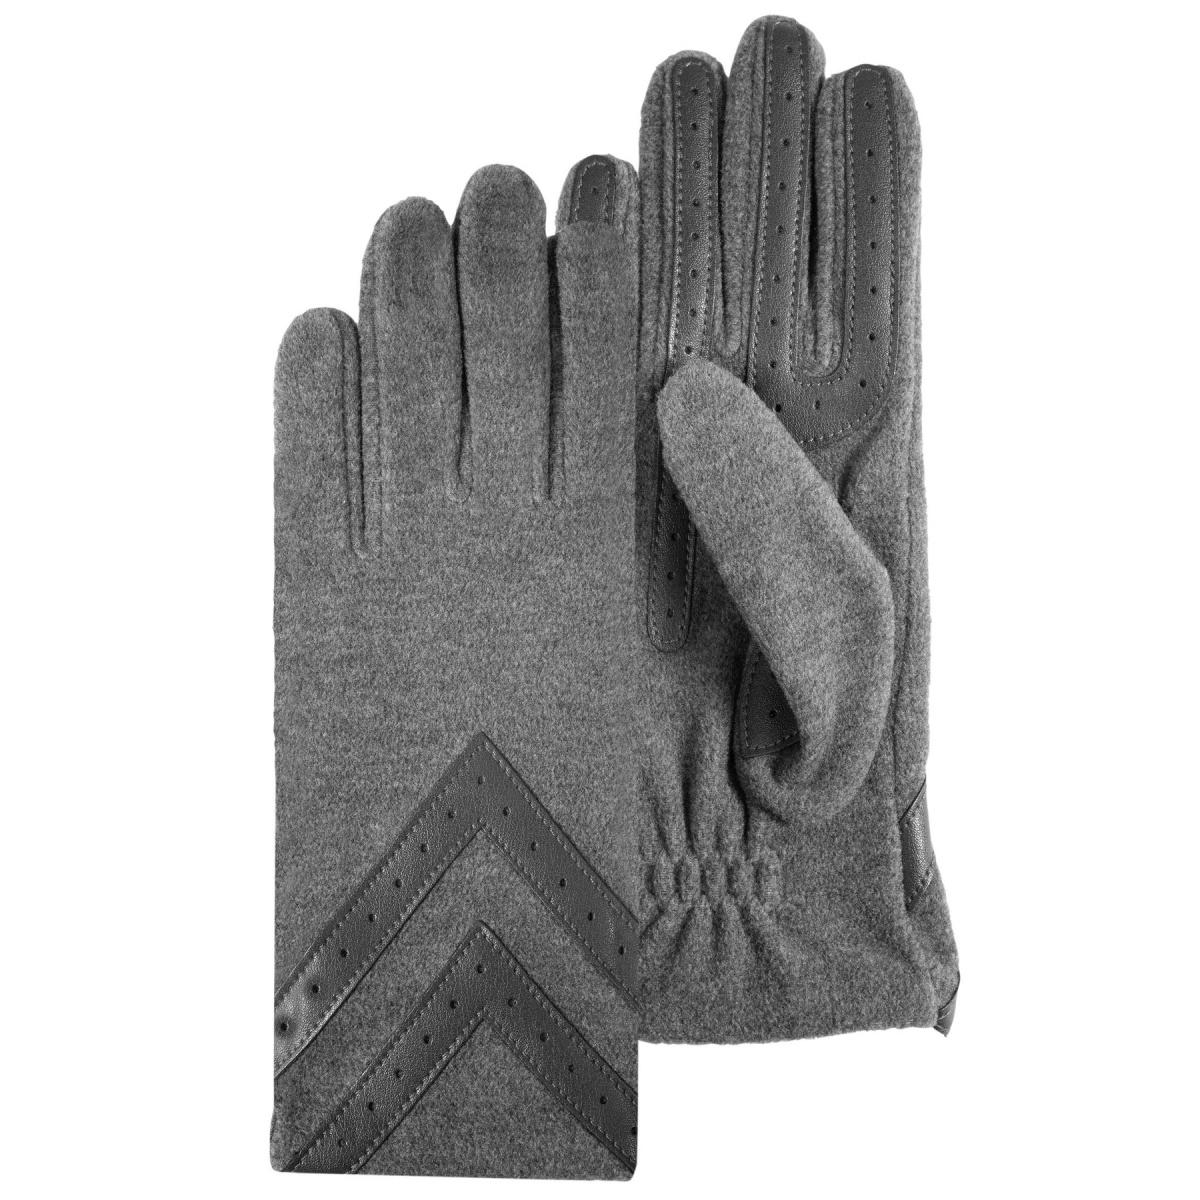 Gants Femme Tactiles Polaire Recyclée Gris - Isotoner Reference